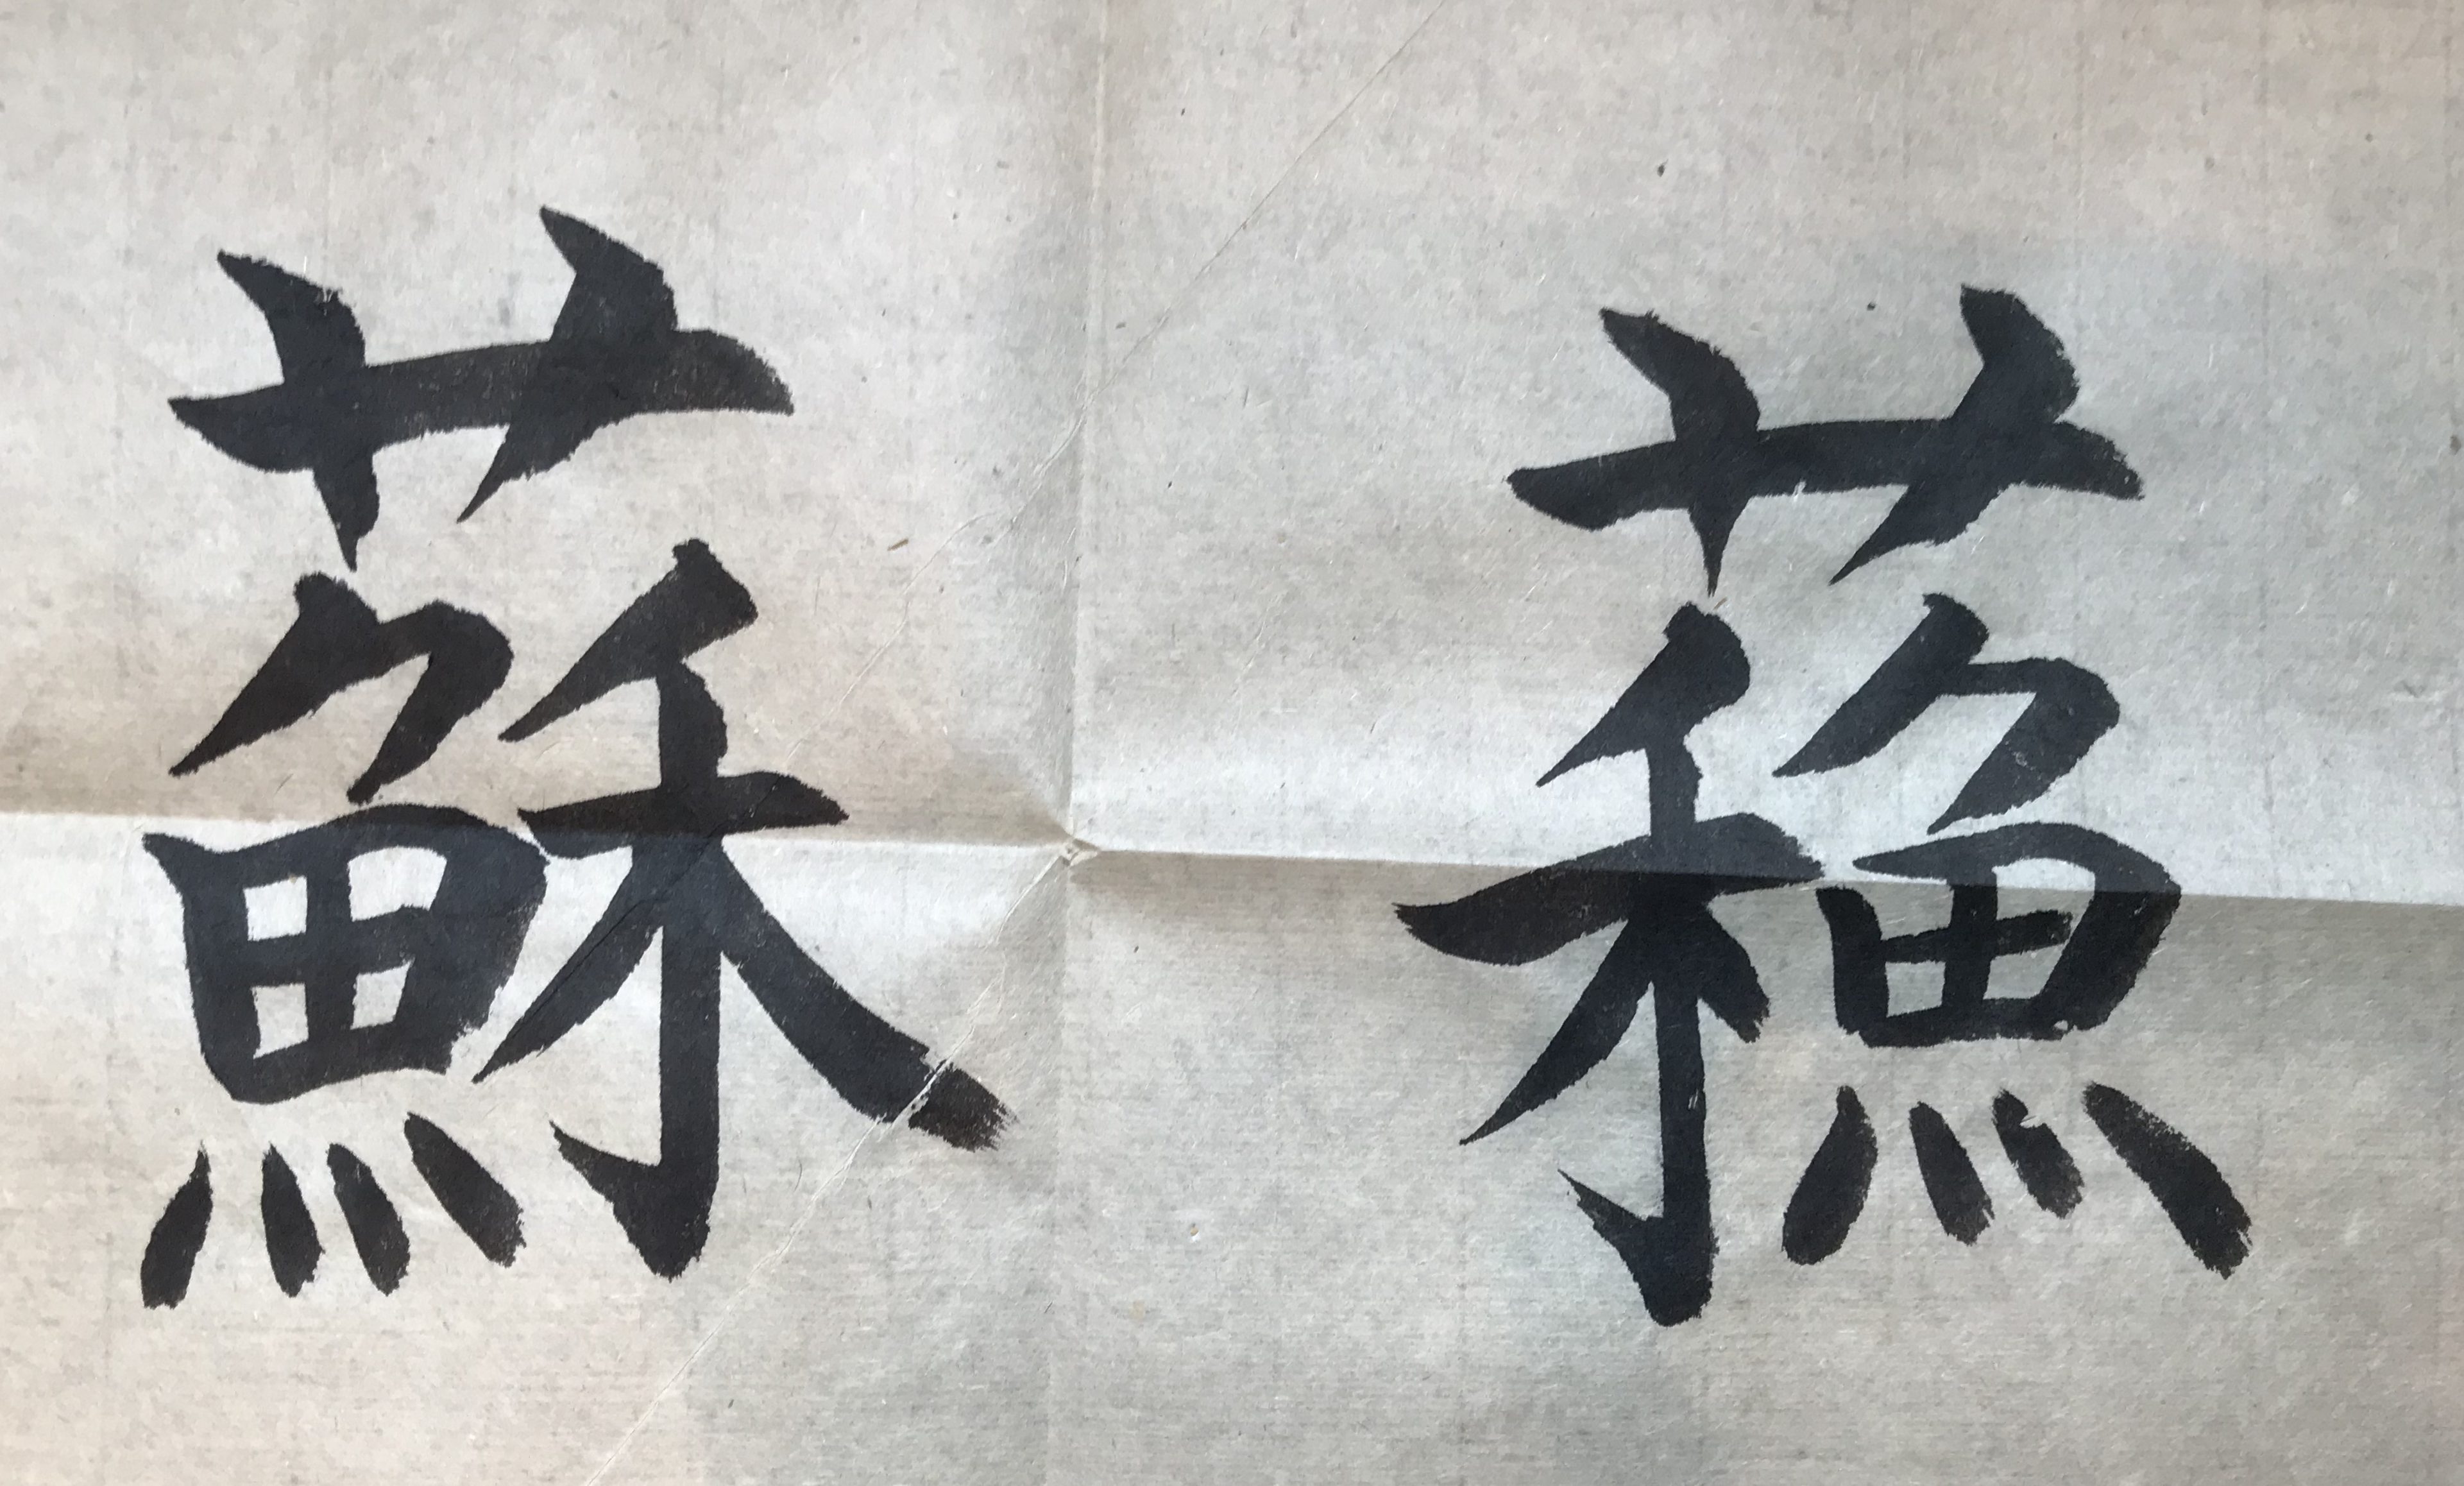 Chinese Character “蘇” and A Fish at Lunch /「蘇」の字と昼食の魚